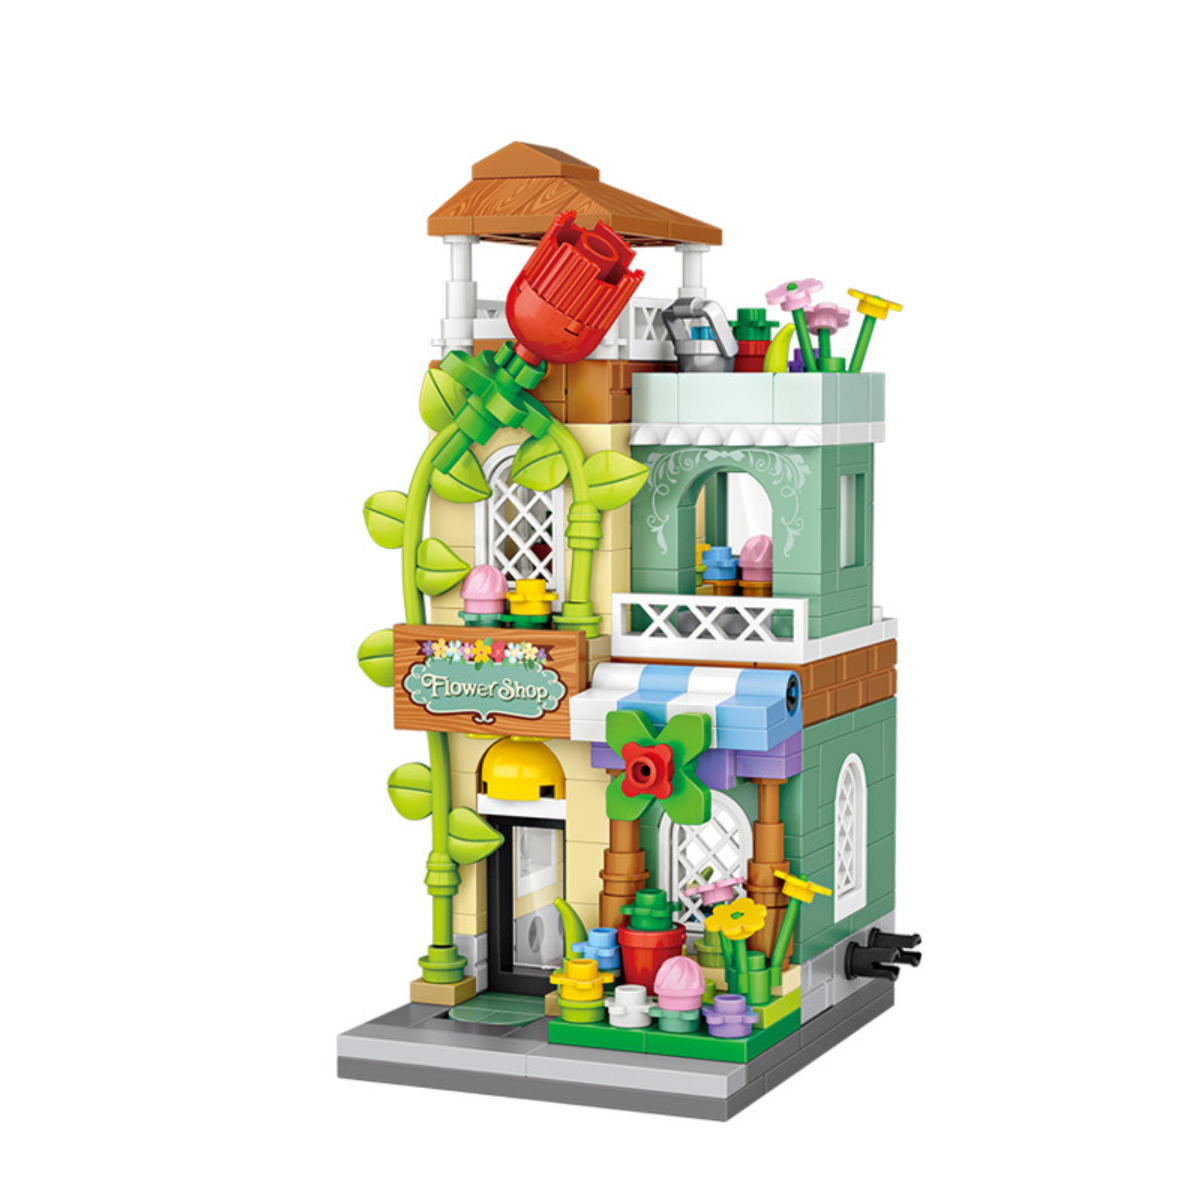 Details about   Mini Street View Japanese Grocery Store Building Blocks Bricks Assembled Toys 